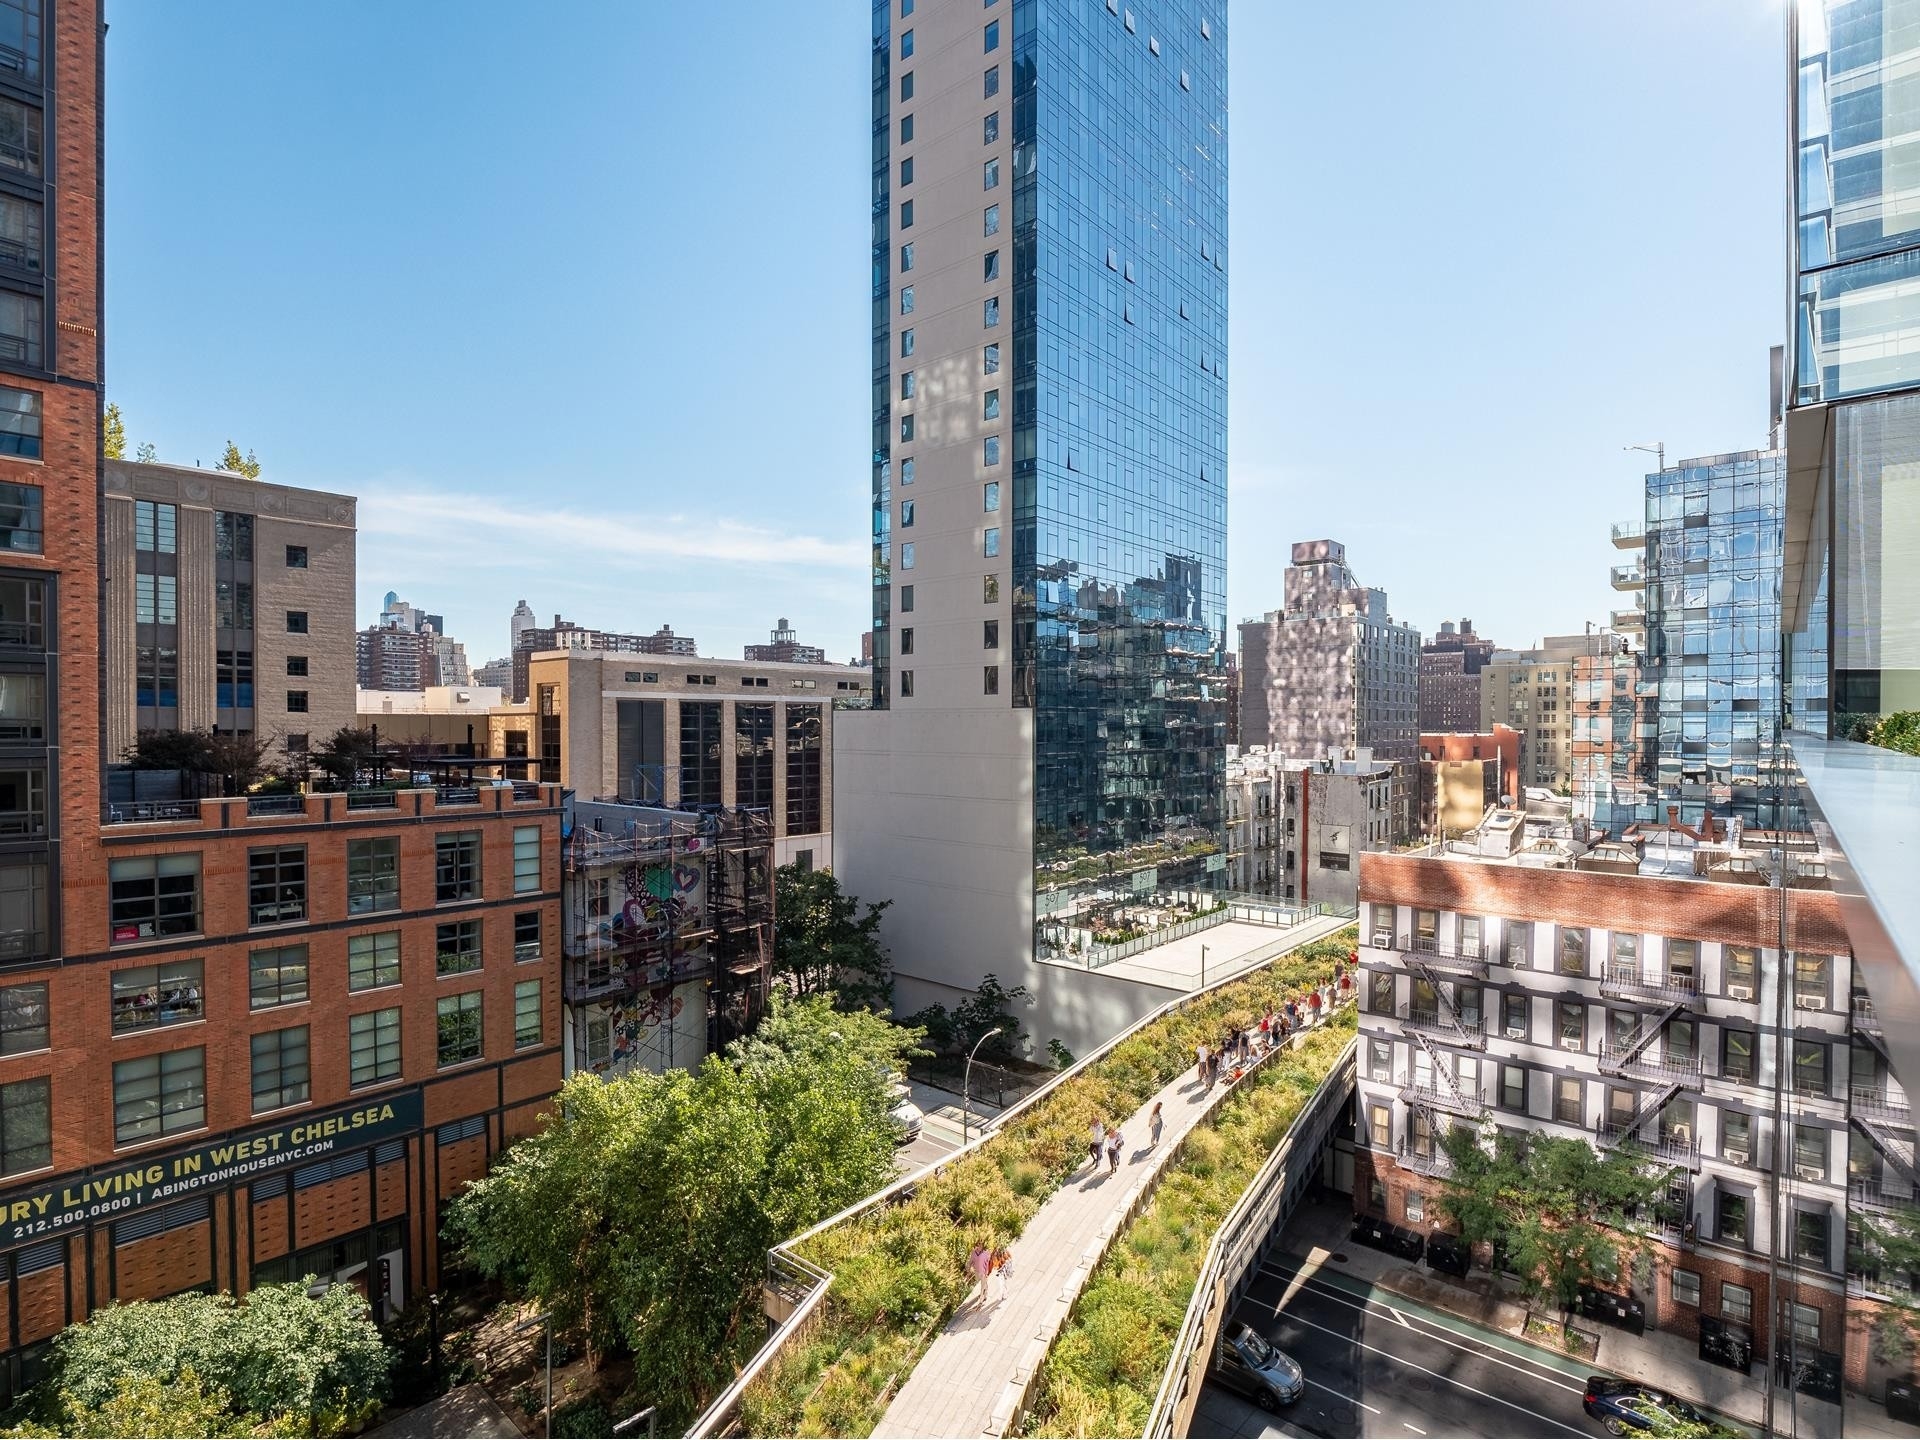 19. Condominiums for Sale at Five One Five, 515 W 29TH ST, 7N Hudson Yards, New York, New York 10001